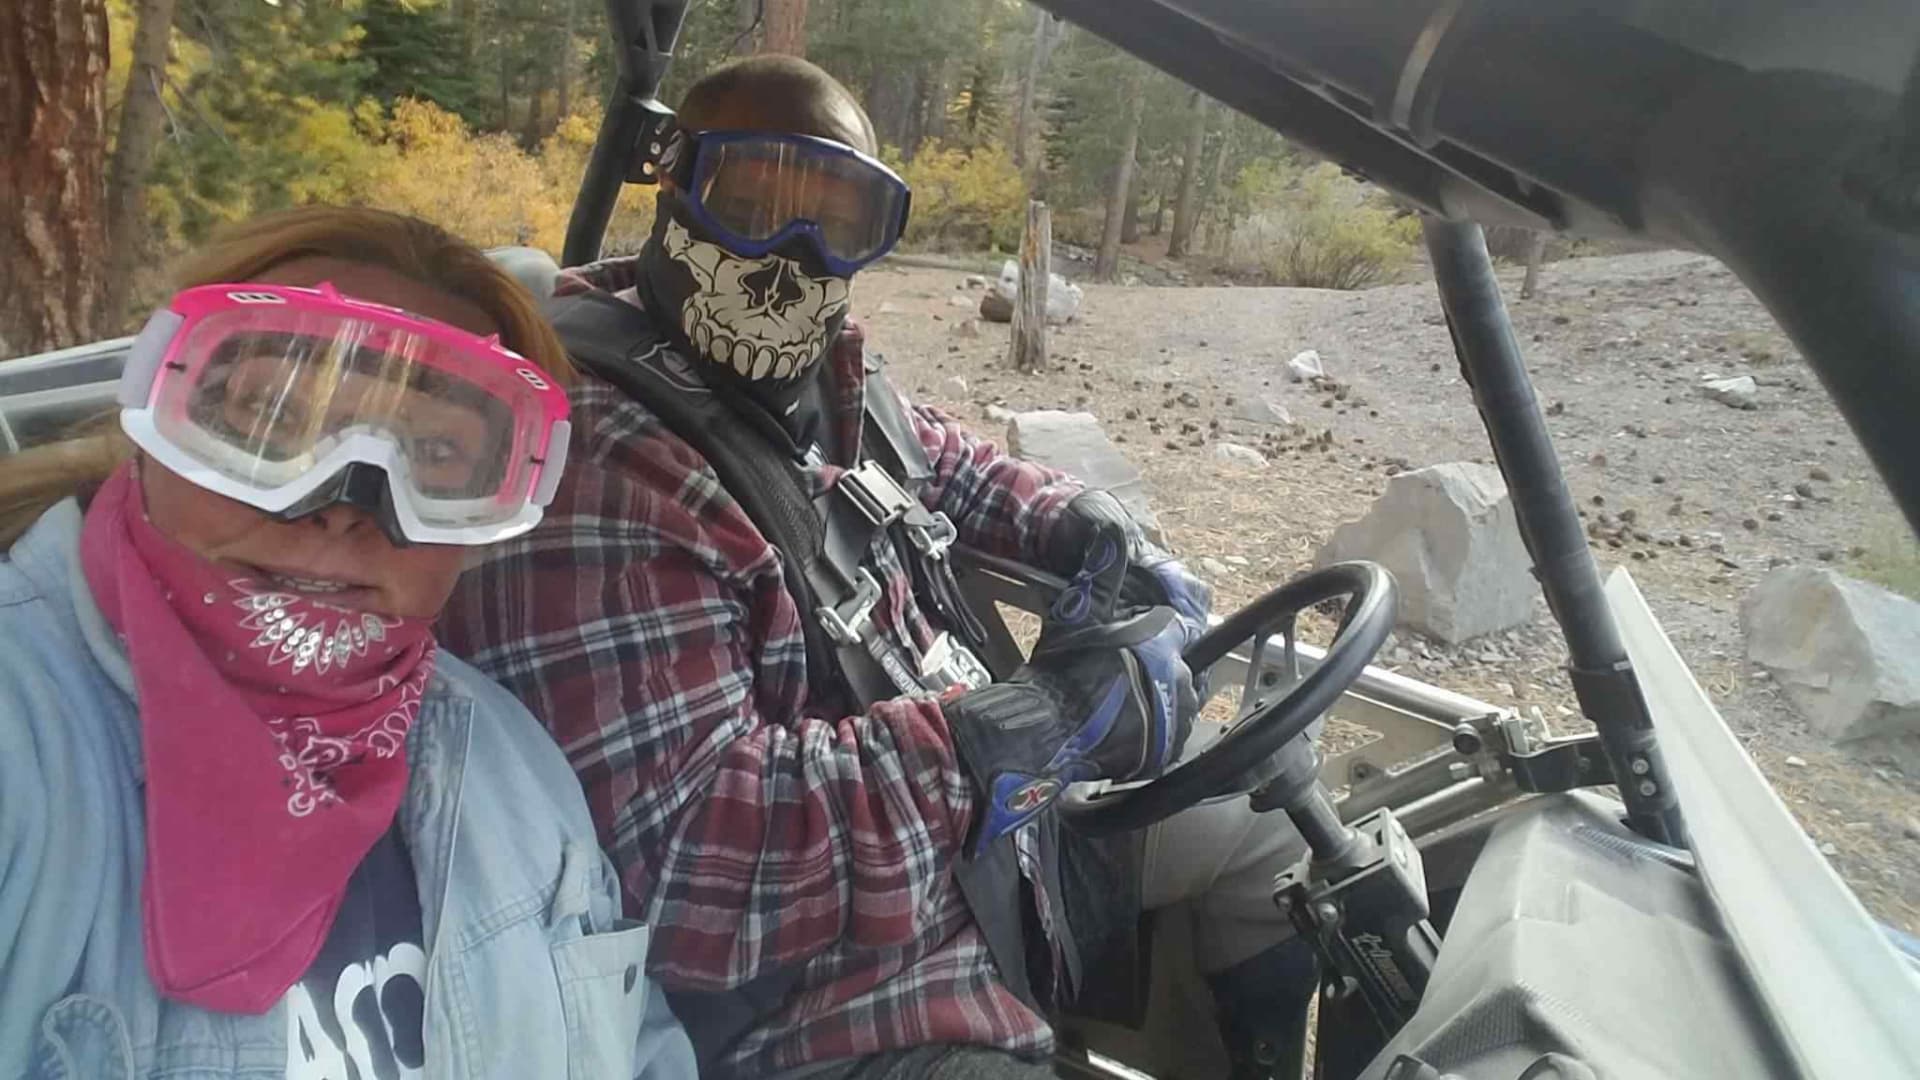 Krytzer says his doctors told him he had five years to live after suffering a car accident. Ten years later, he's seen here enjoying a dune buggy ride with his wife Lisa.